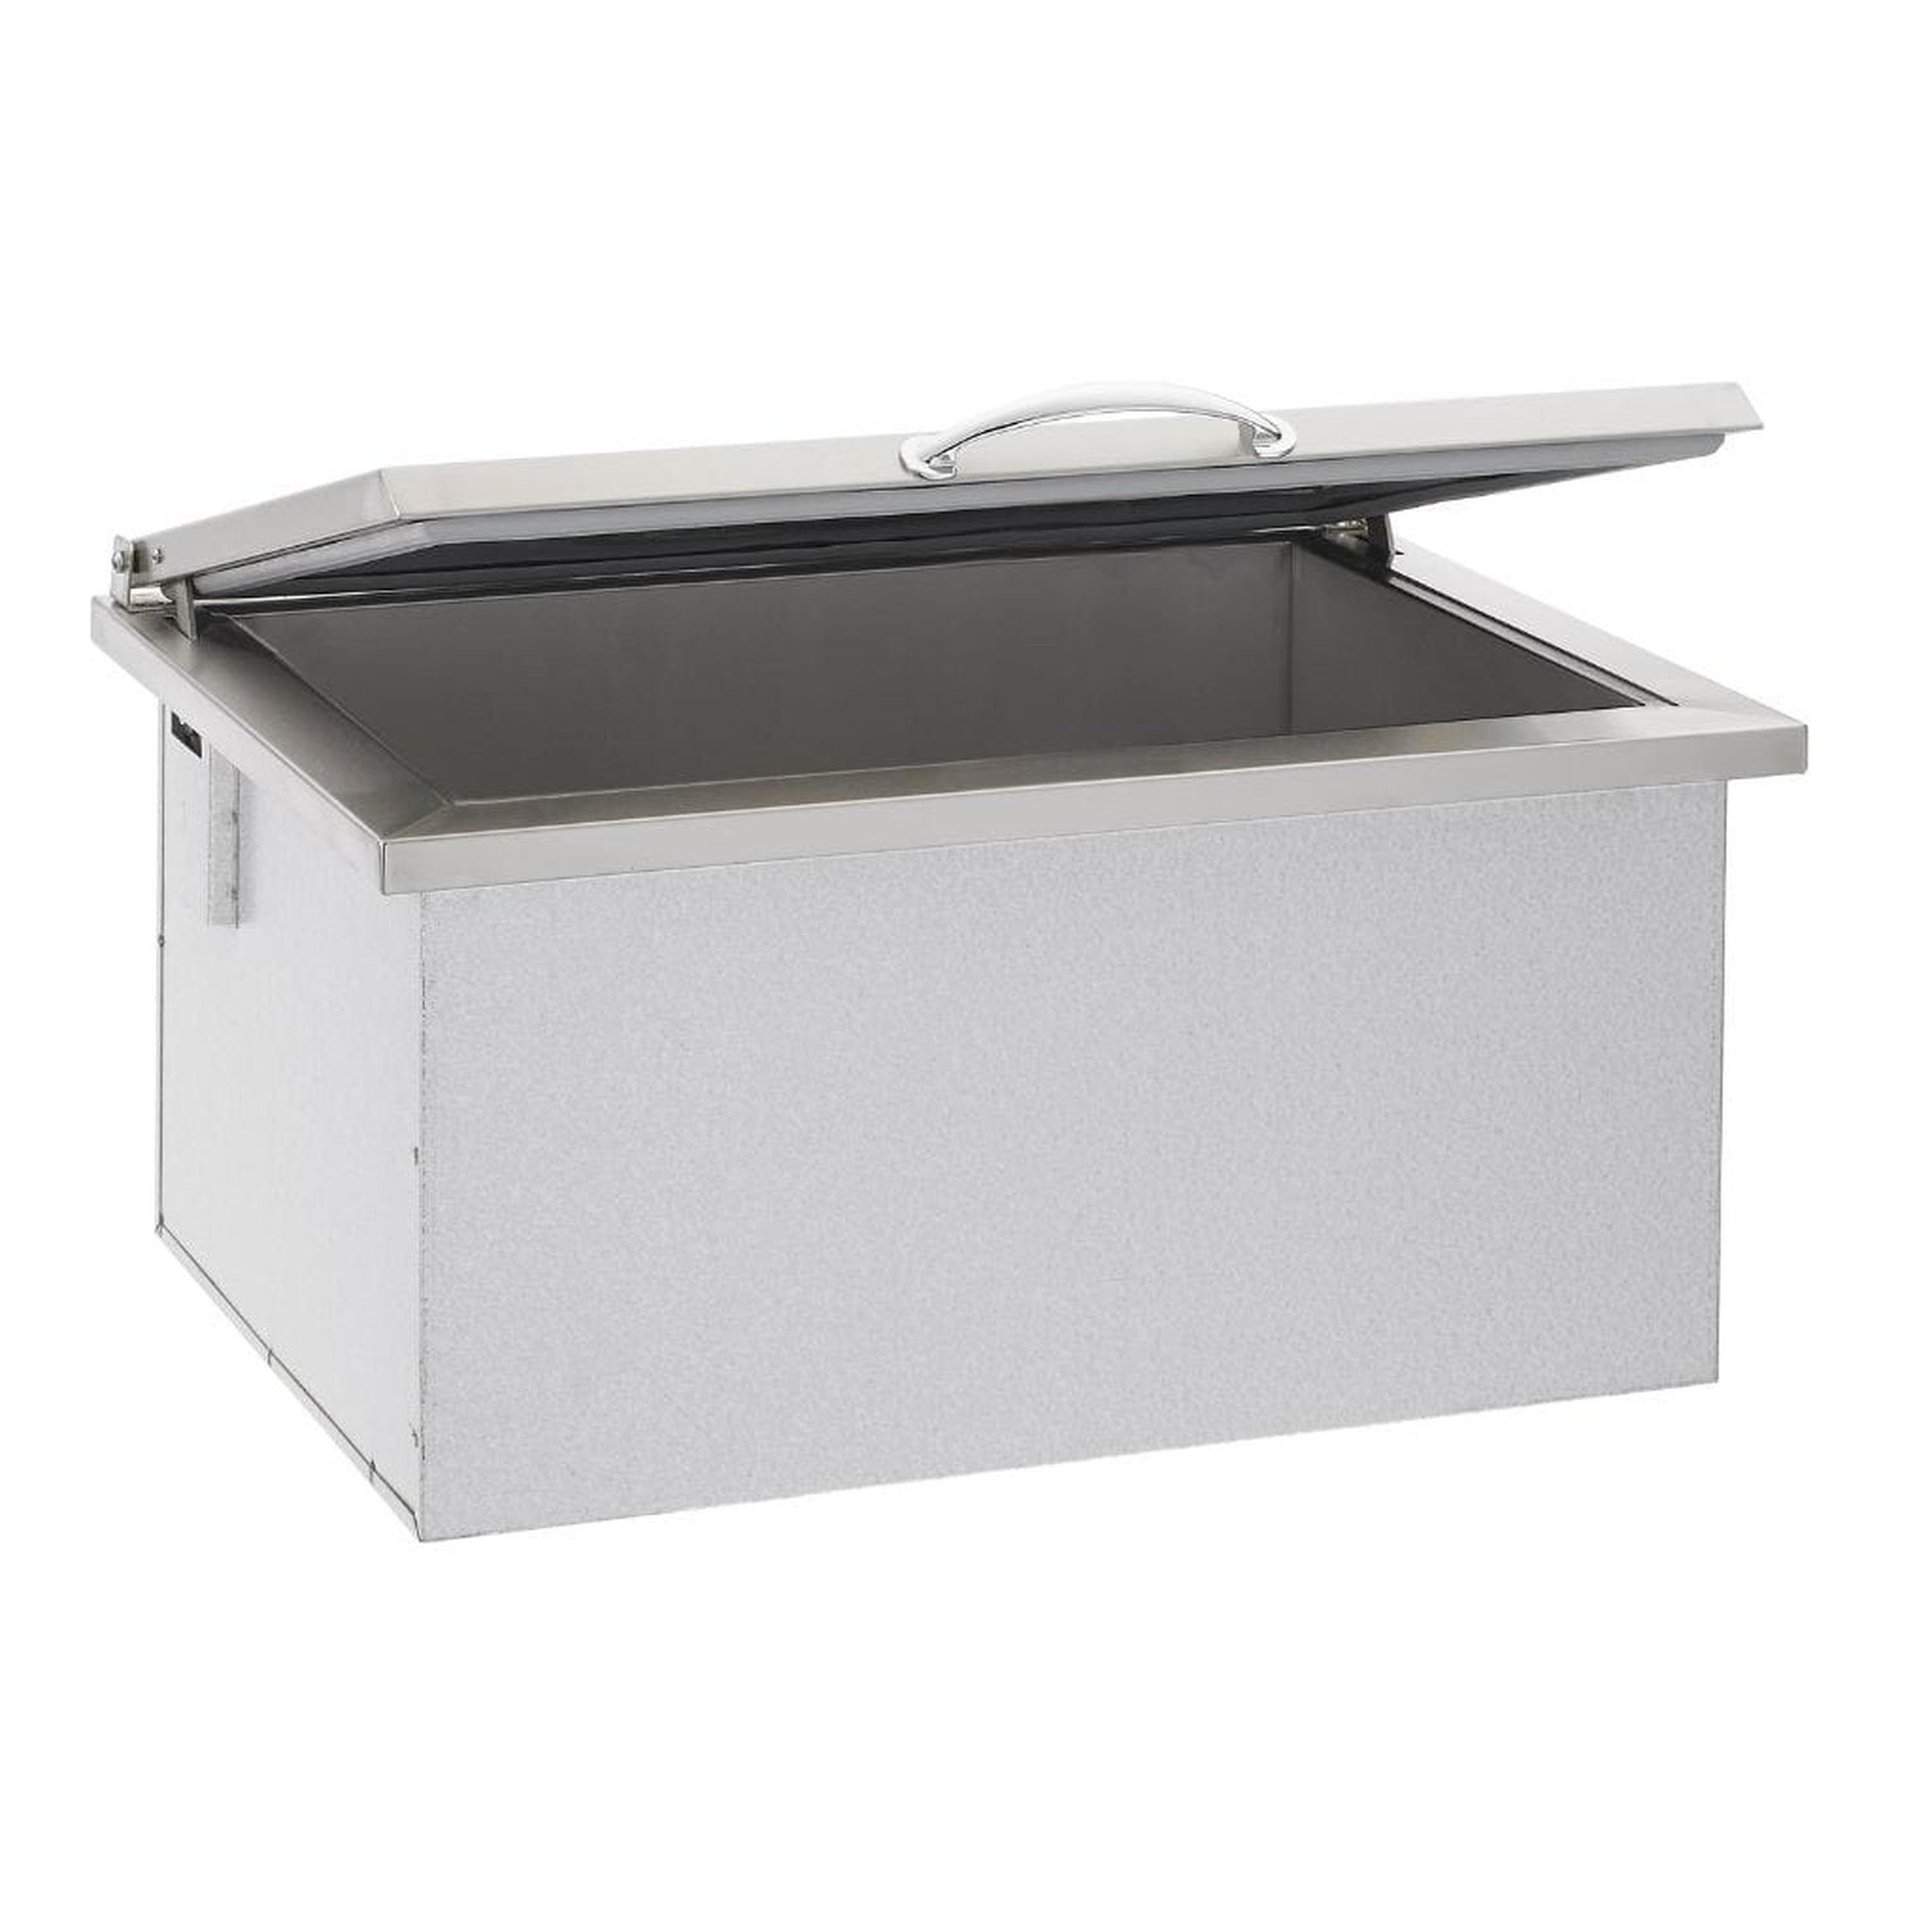 Summerset Grills 16-Inch Stainless Steel Drop-In Ice Bin Cooler with  Removable Lid - 20 Lb. Ice Capacity